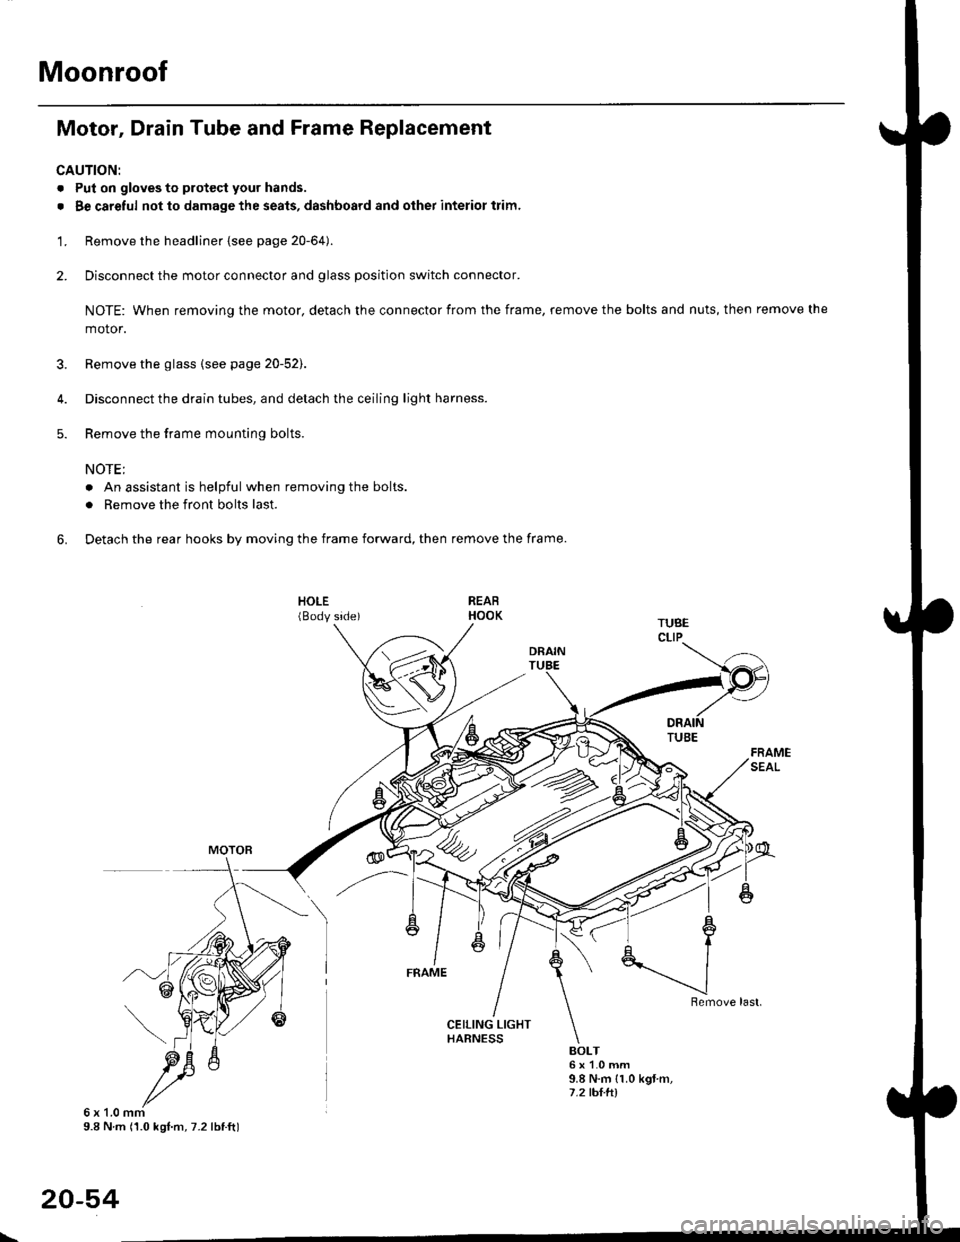 HONDA CIVIC 1999 6.G Owners Guide Moonroof
Motor, Drain Tube and Frame Replacement
CAUTION:
. Put on gloves to protecl your hands.
. Be careful not to damage the seats, dashboard and other interior trim.
1. Remove the headliner {see 